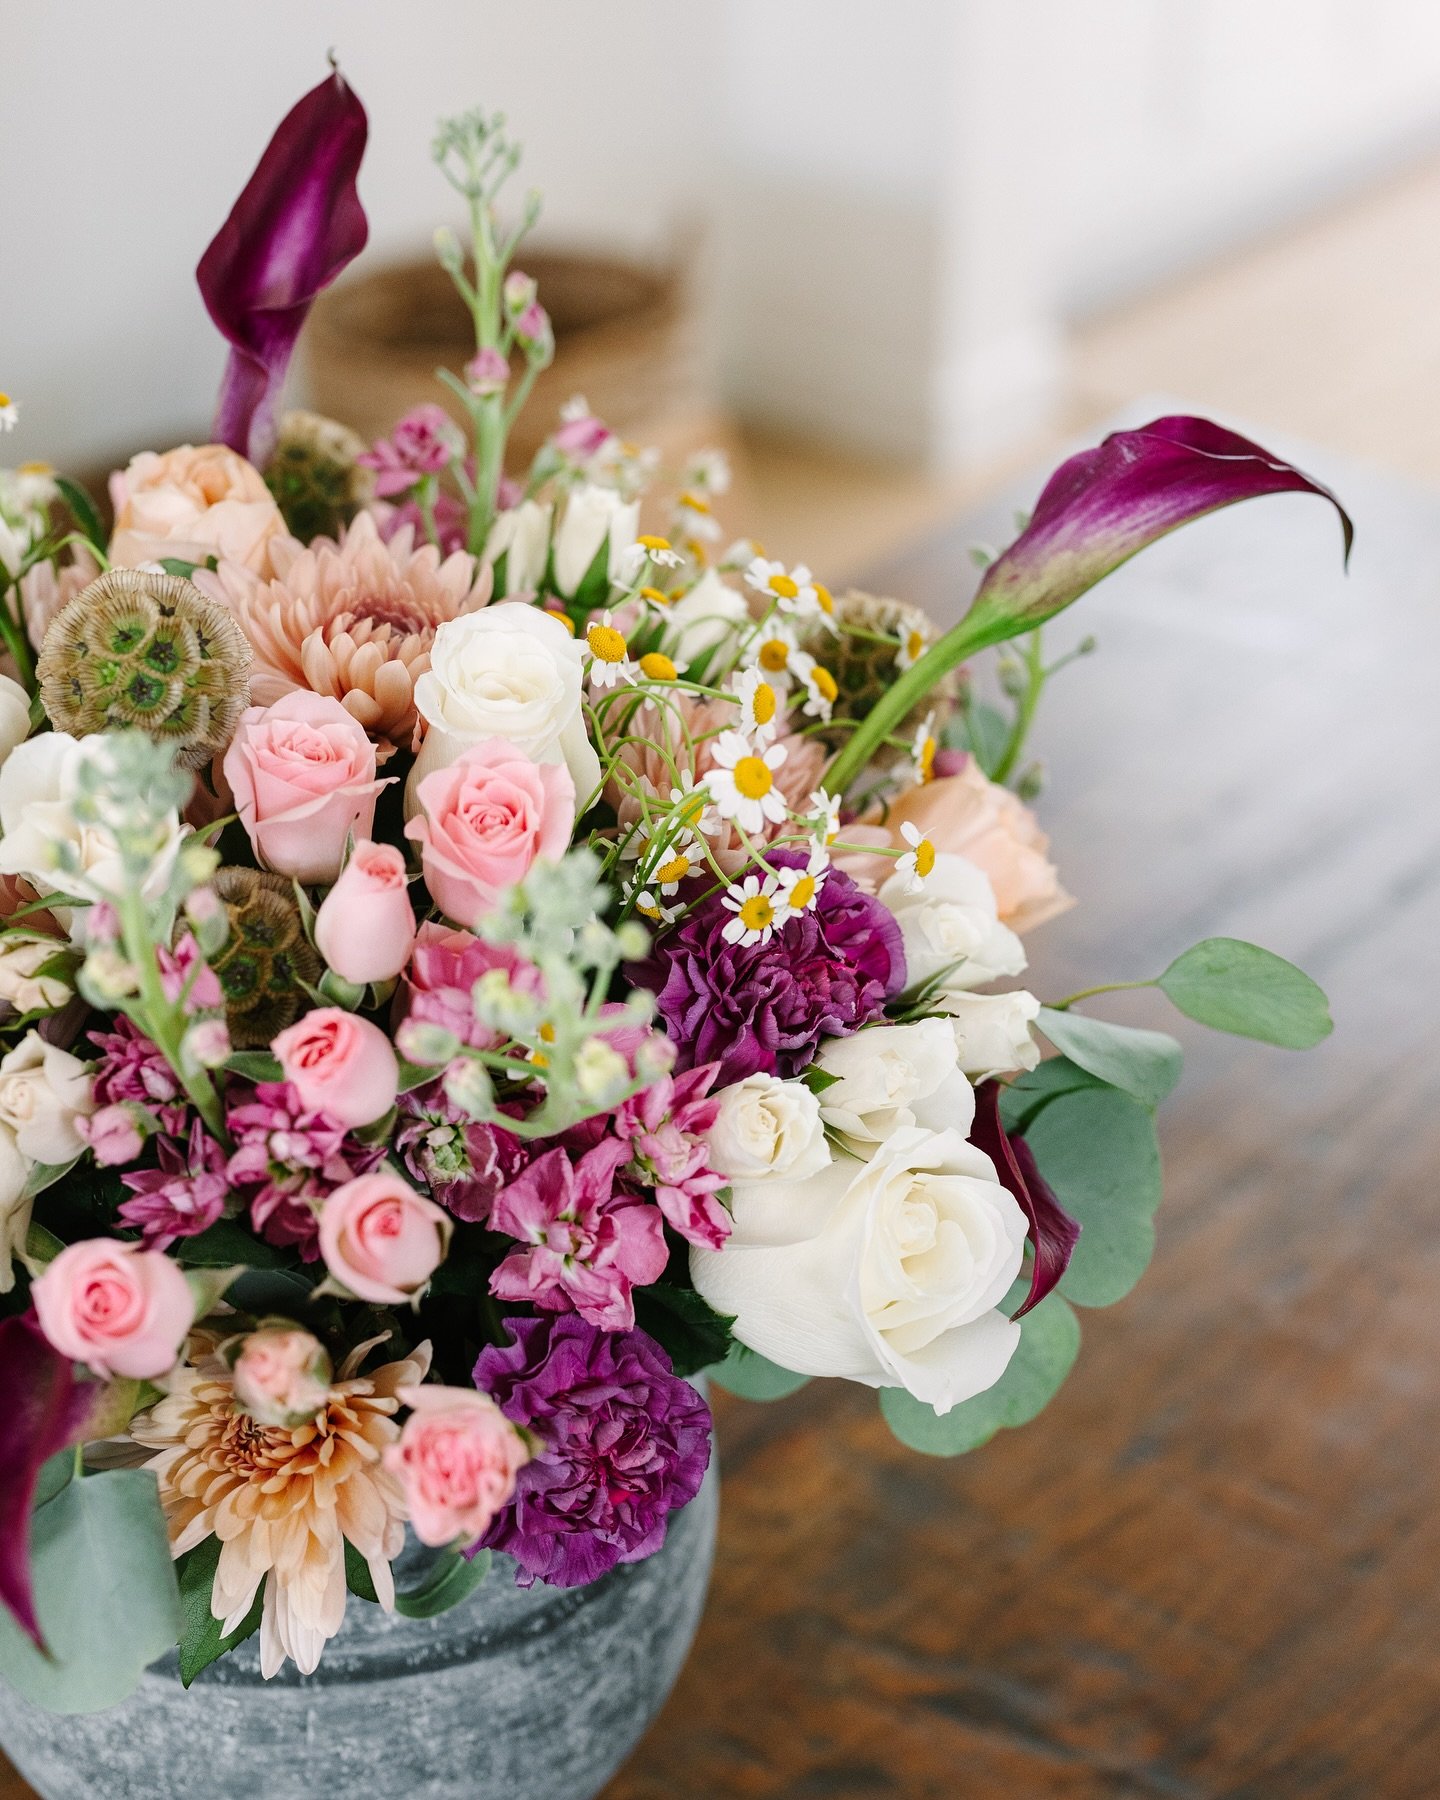 Last Day to Order for Mother&rsquo;s Day! 💕✨

#myfloralcompass, #gatherinbloom, #fcblooms
#freshflowers #amazonflowers #lifestyleflowers #lifestyleshoot #onlineflowers #floraldecor #styledflorals #MothersDayFlowers #MomInBloom #BloomForMom #MomLoves